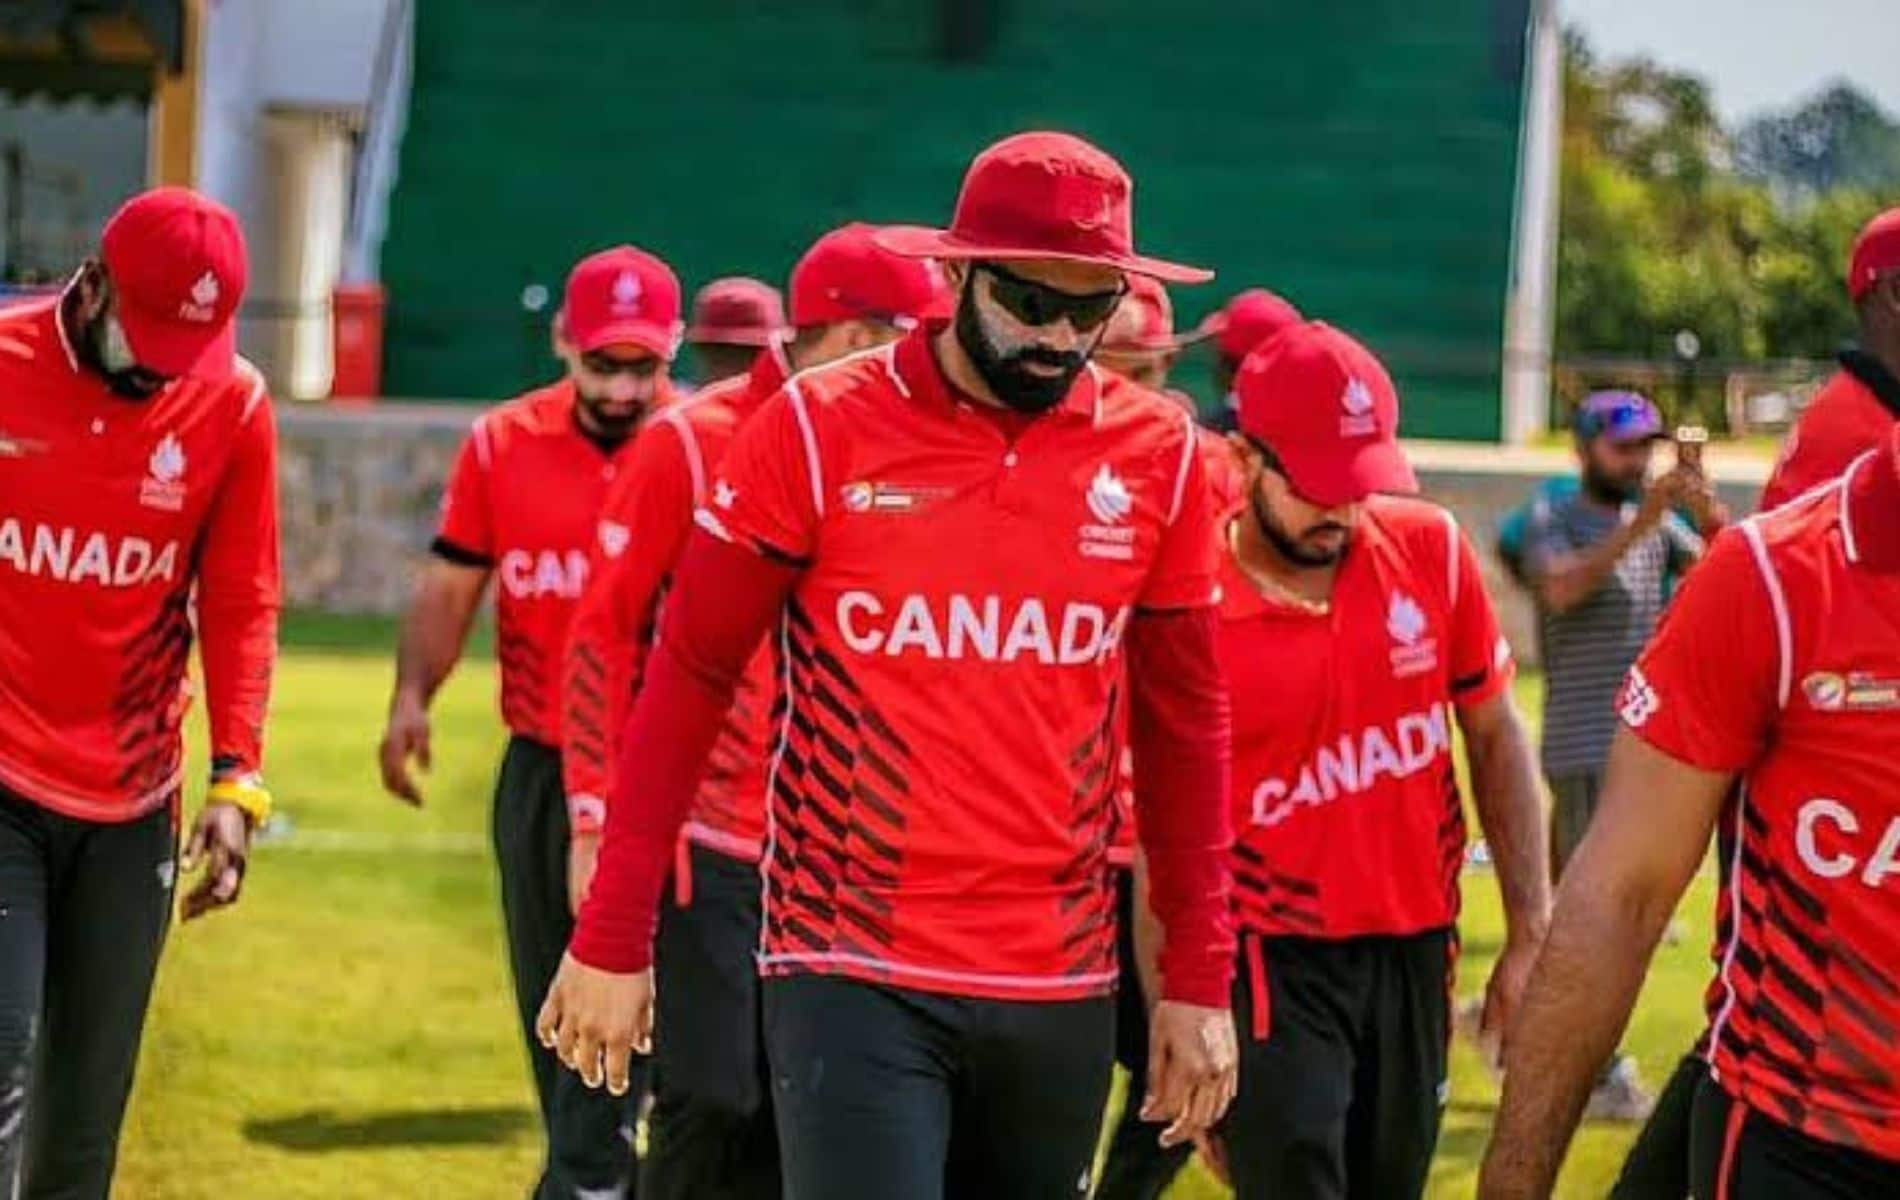 Canada qualified for the T20 World Cup after they beat Bermuda (X)